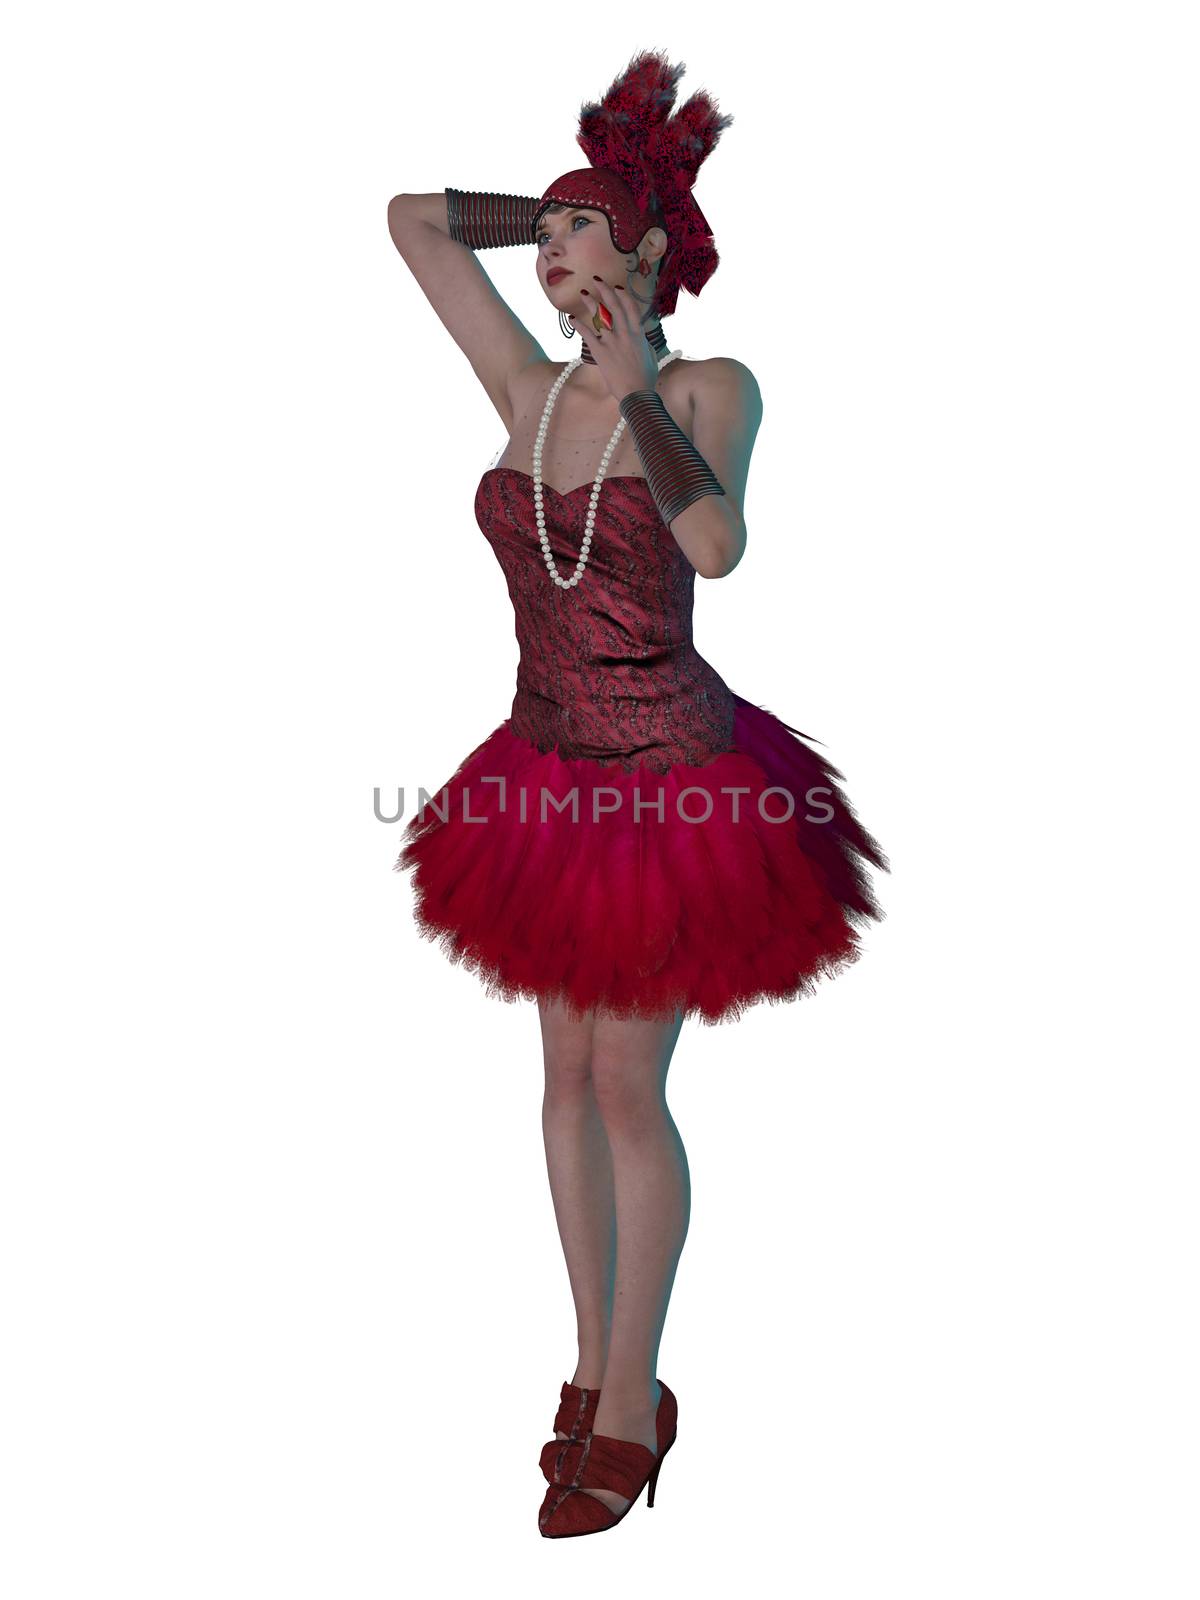 A girl in a red feathered dress as a flapper of the 1920's with pearl jewelry and matching hat.